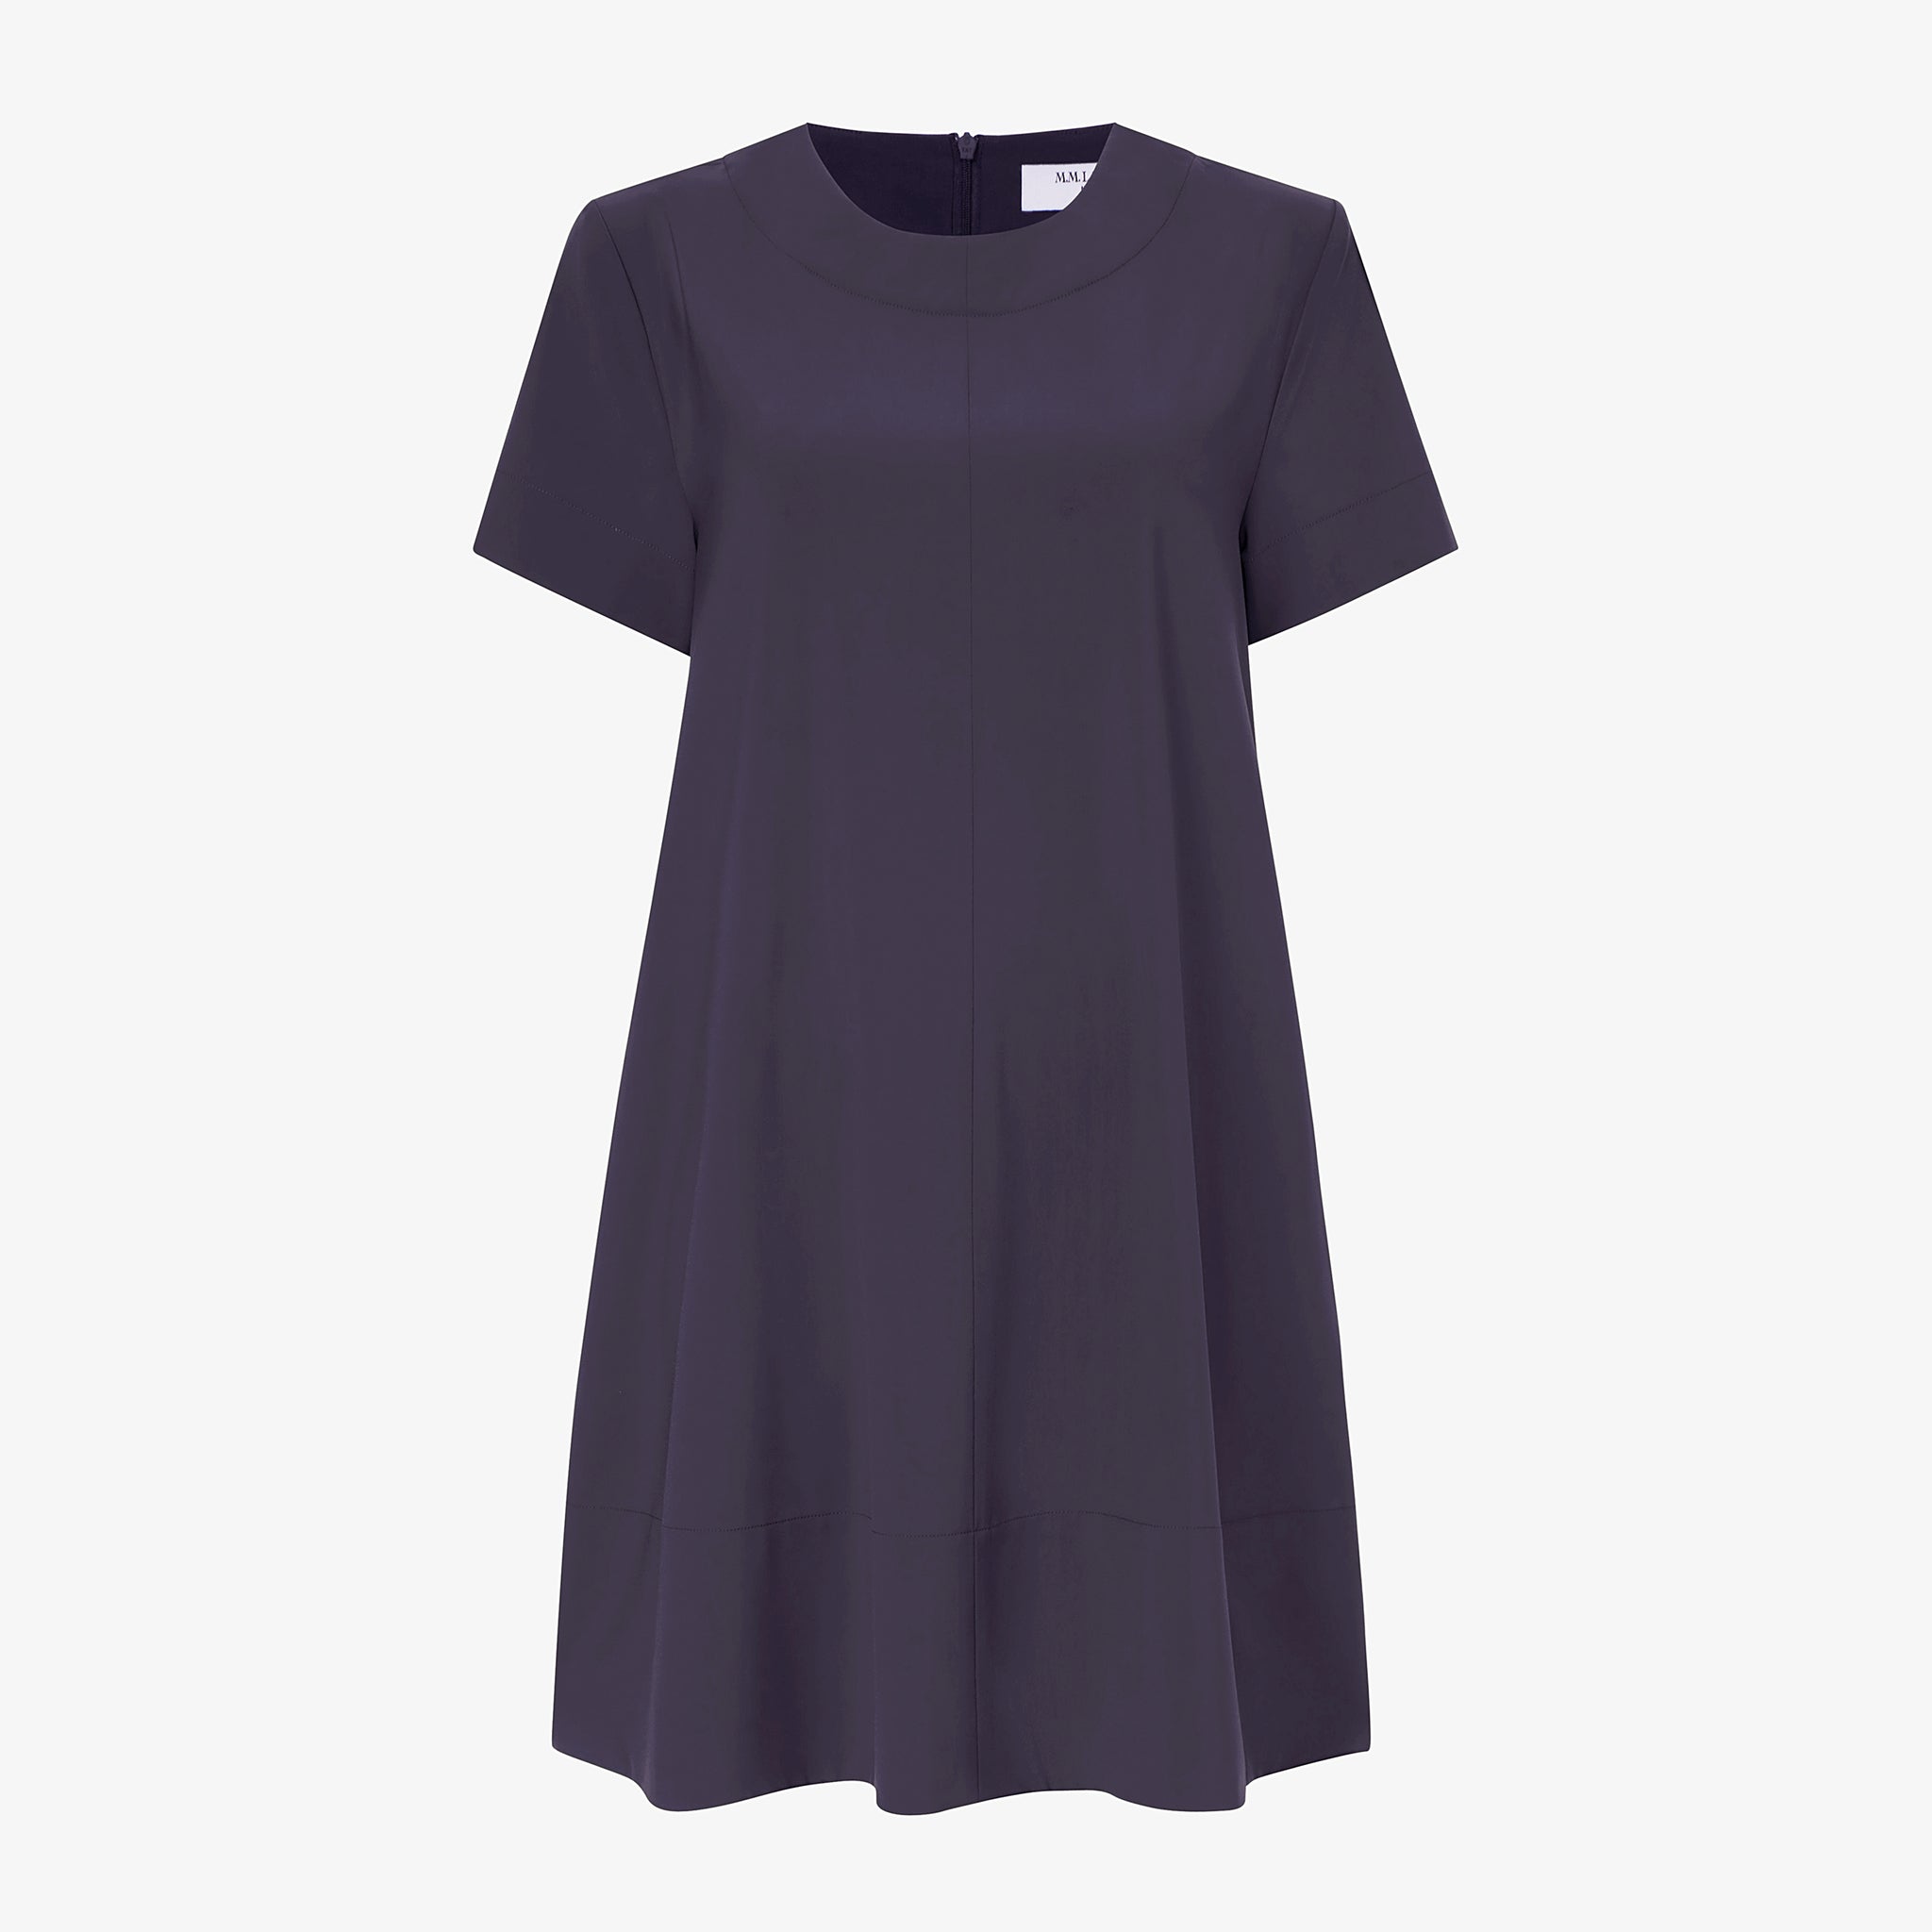 packshot image of the corrie dress in cool charcoal